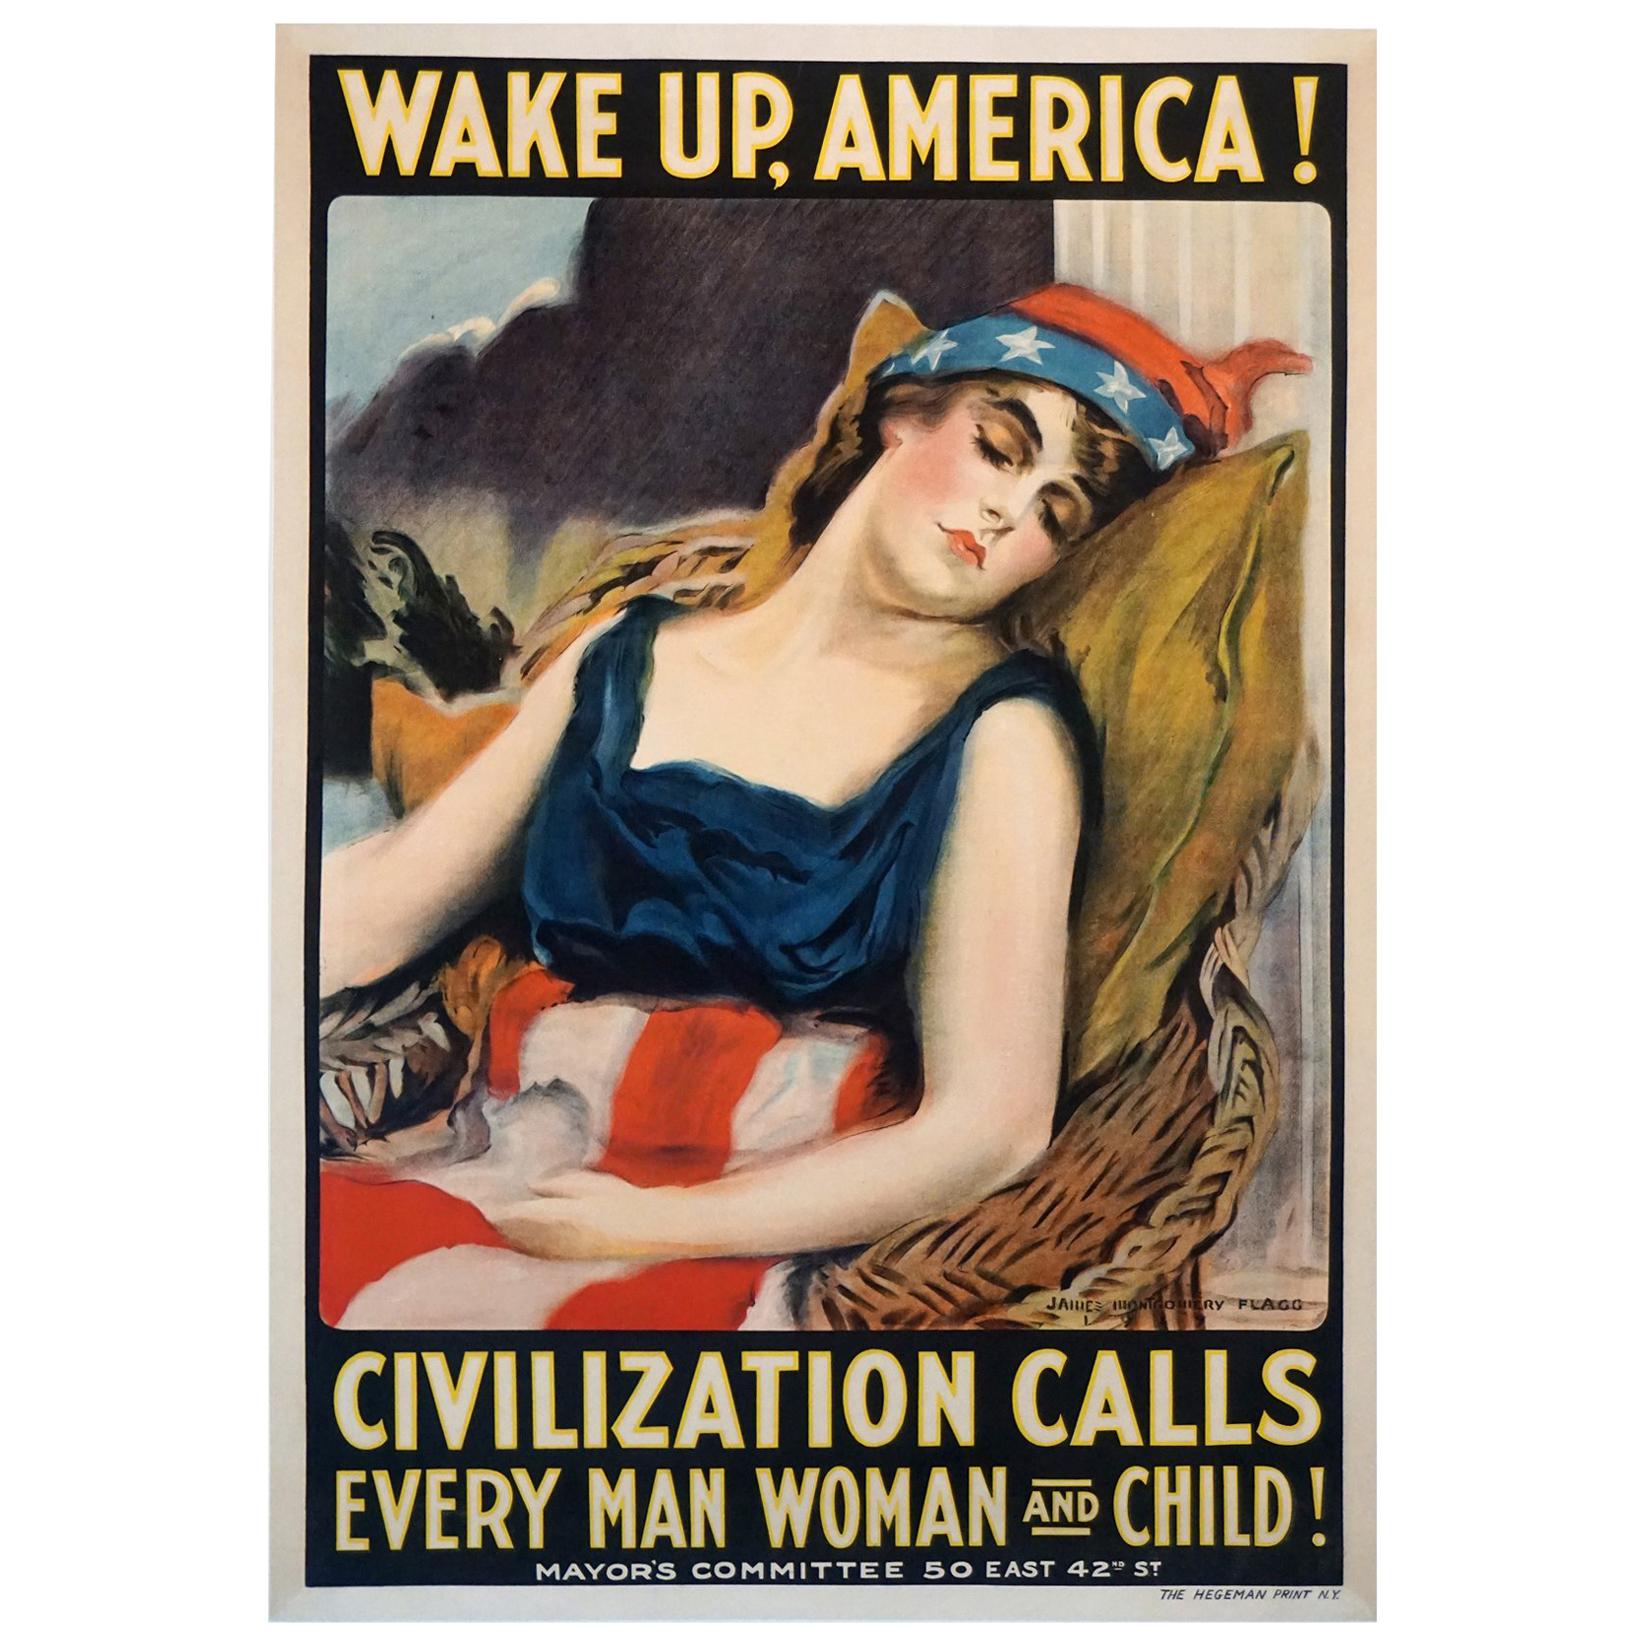 U.S. Vintage WWI Propaganda Poster ‘Wake Up America’ by James Montgomery Flagg For Sale